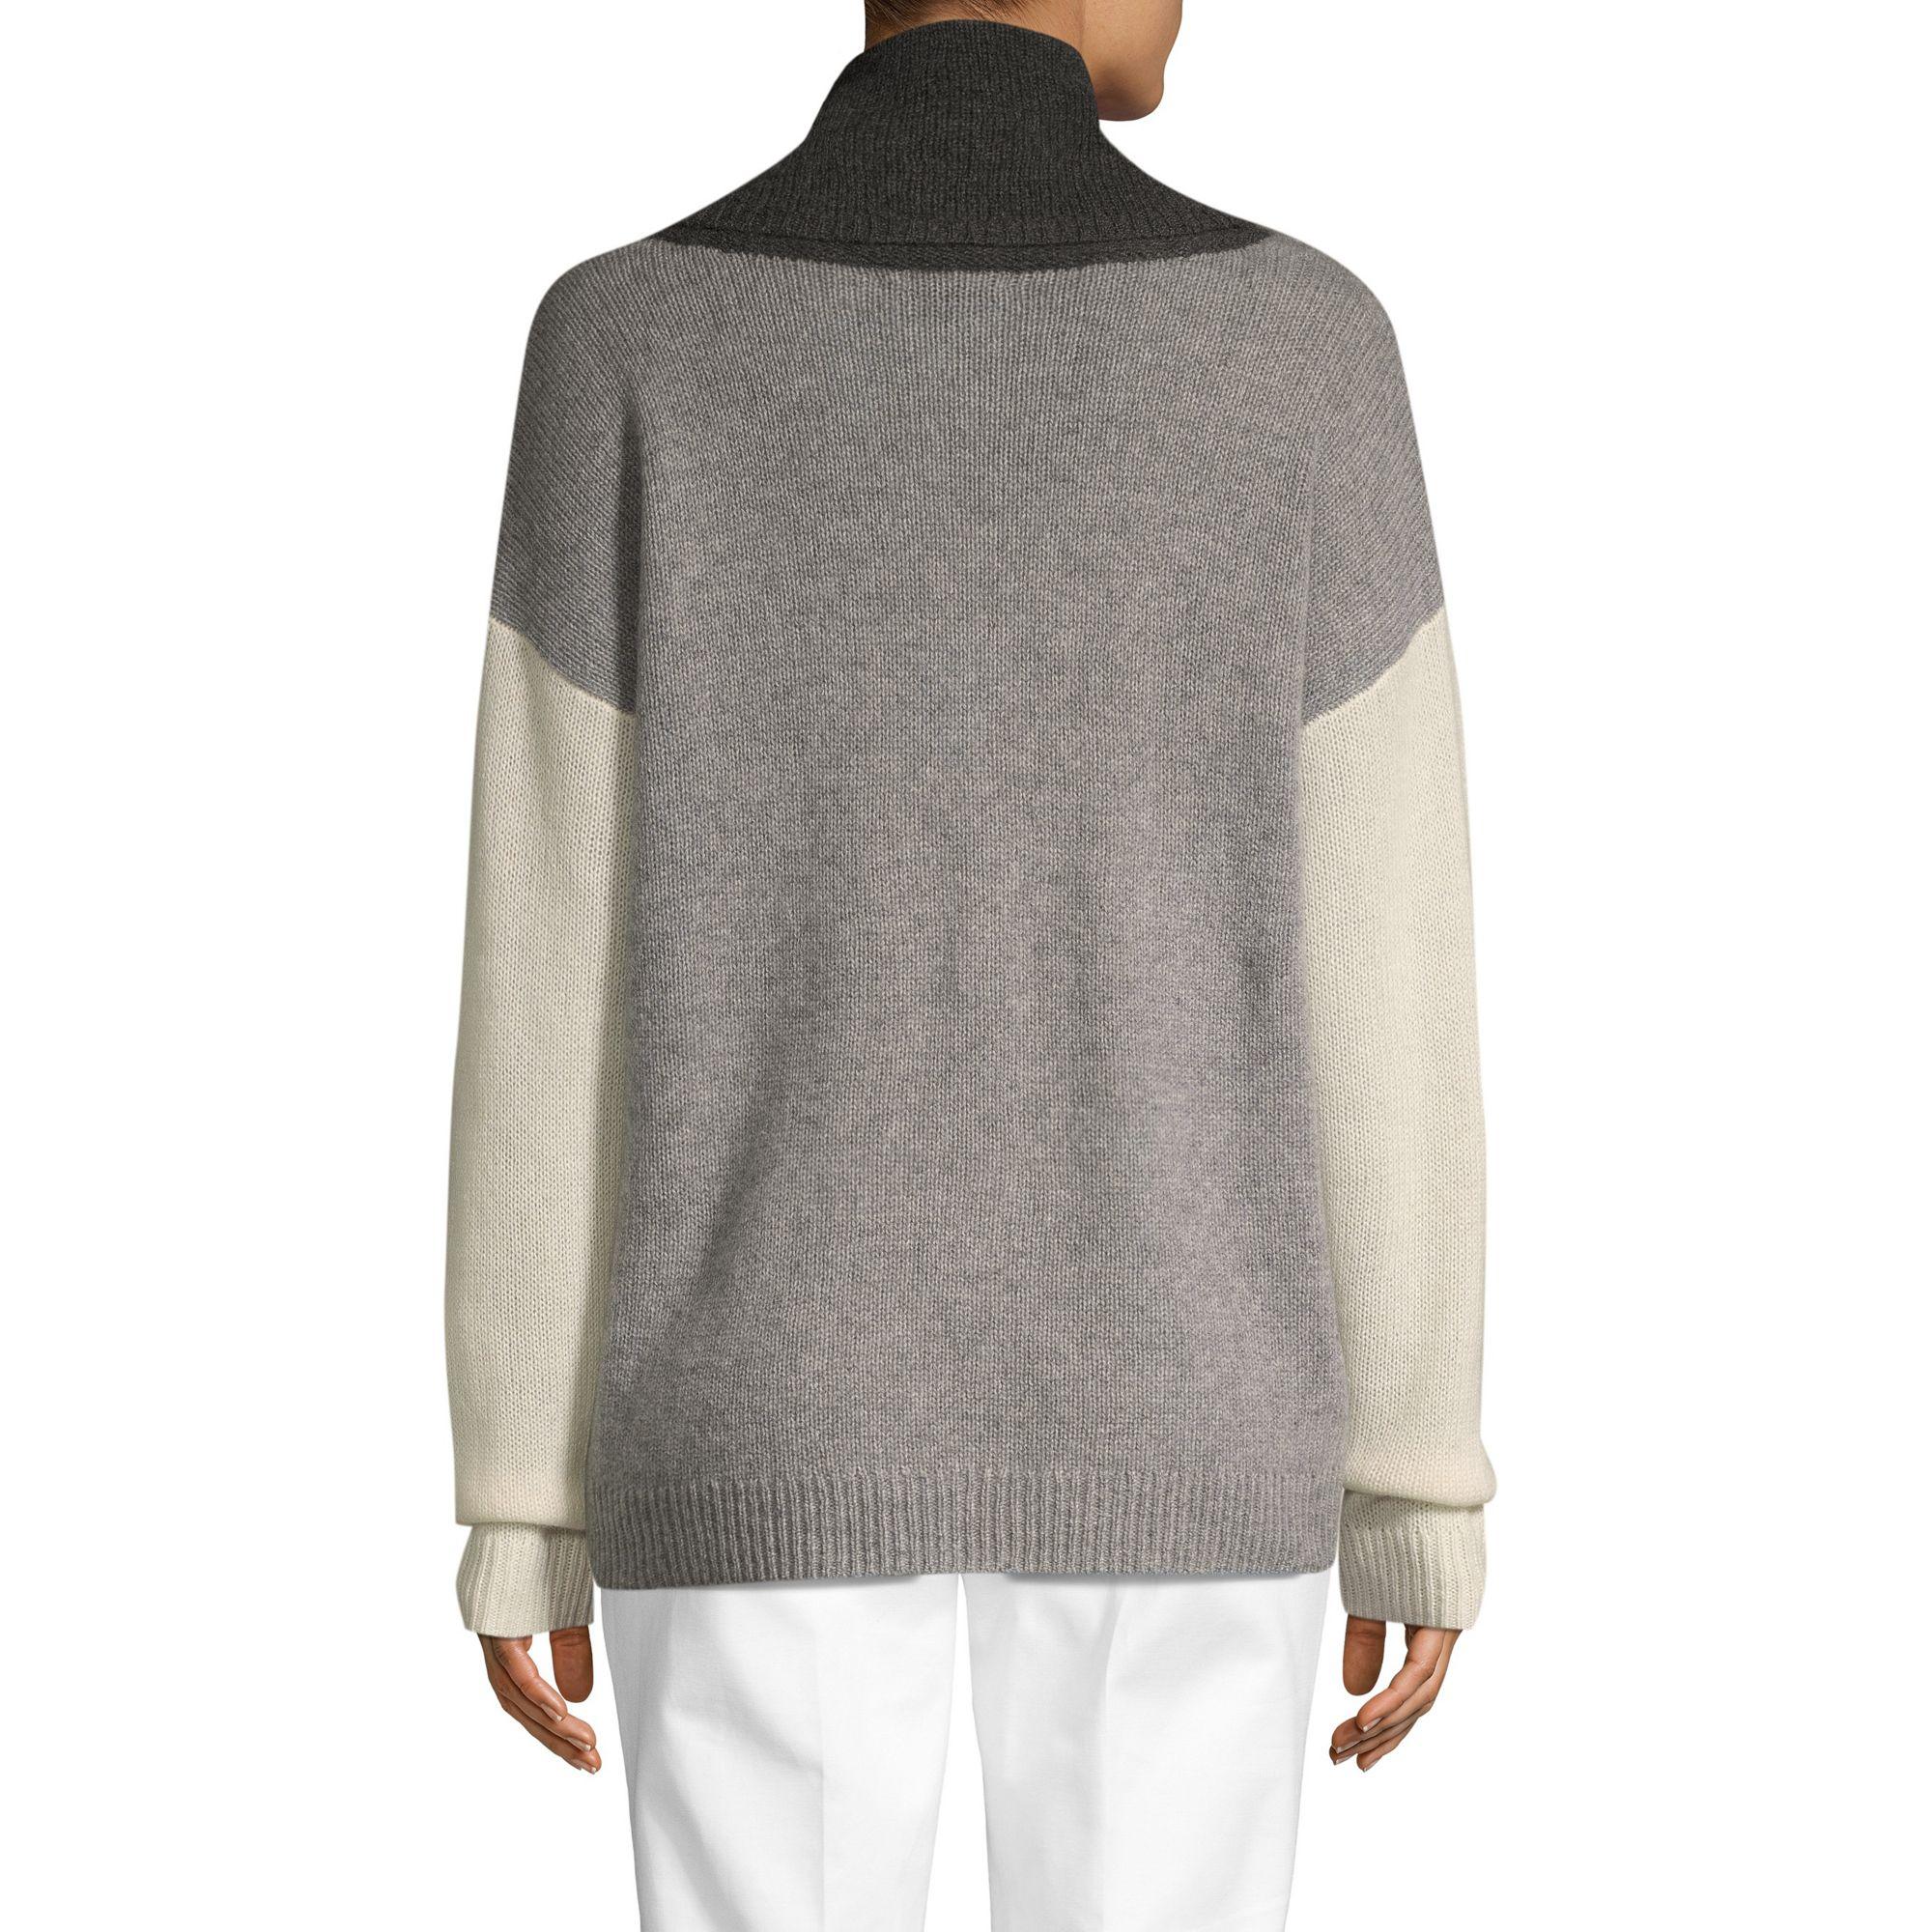 Saks Fifth Avenue Colorblock Cashmere Sweater in Pearl (Gray) - Lyst